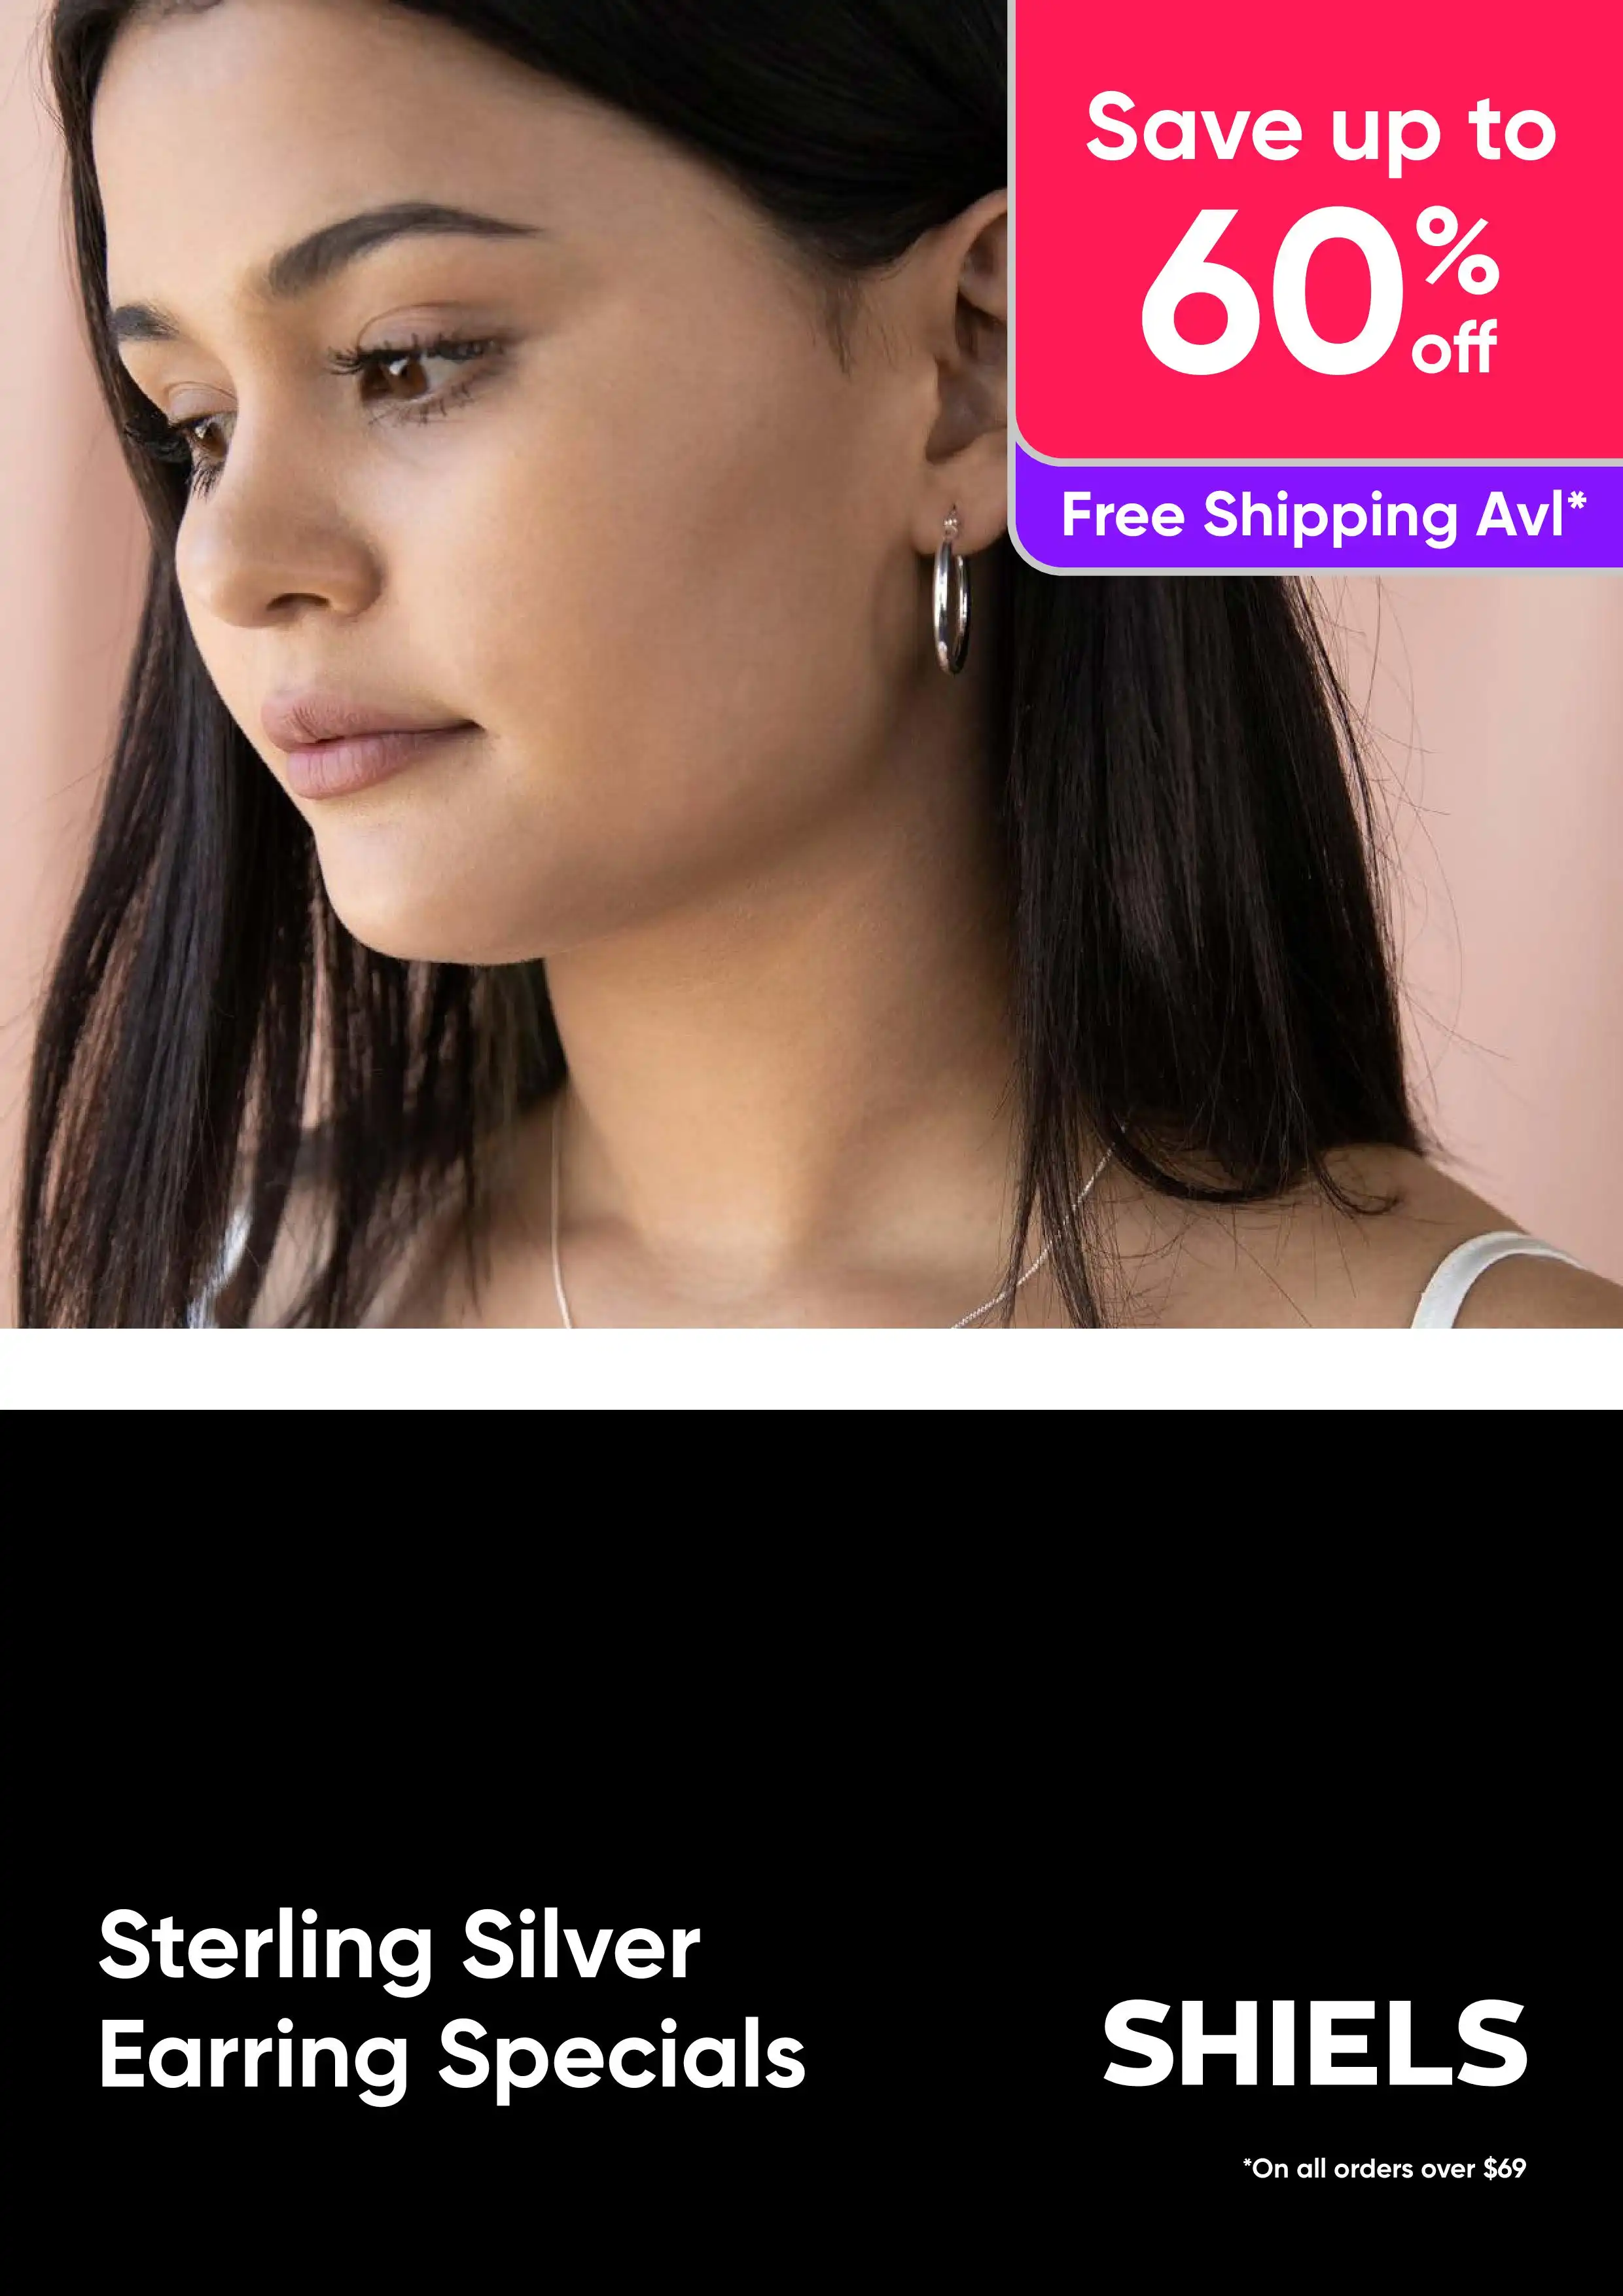 Sterling Silver Earrings - Up to 60% Off